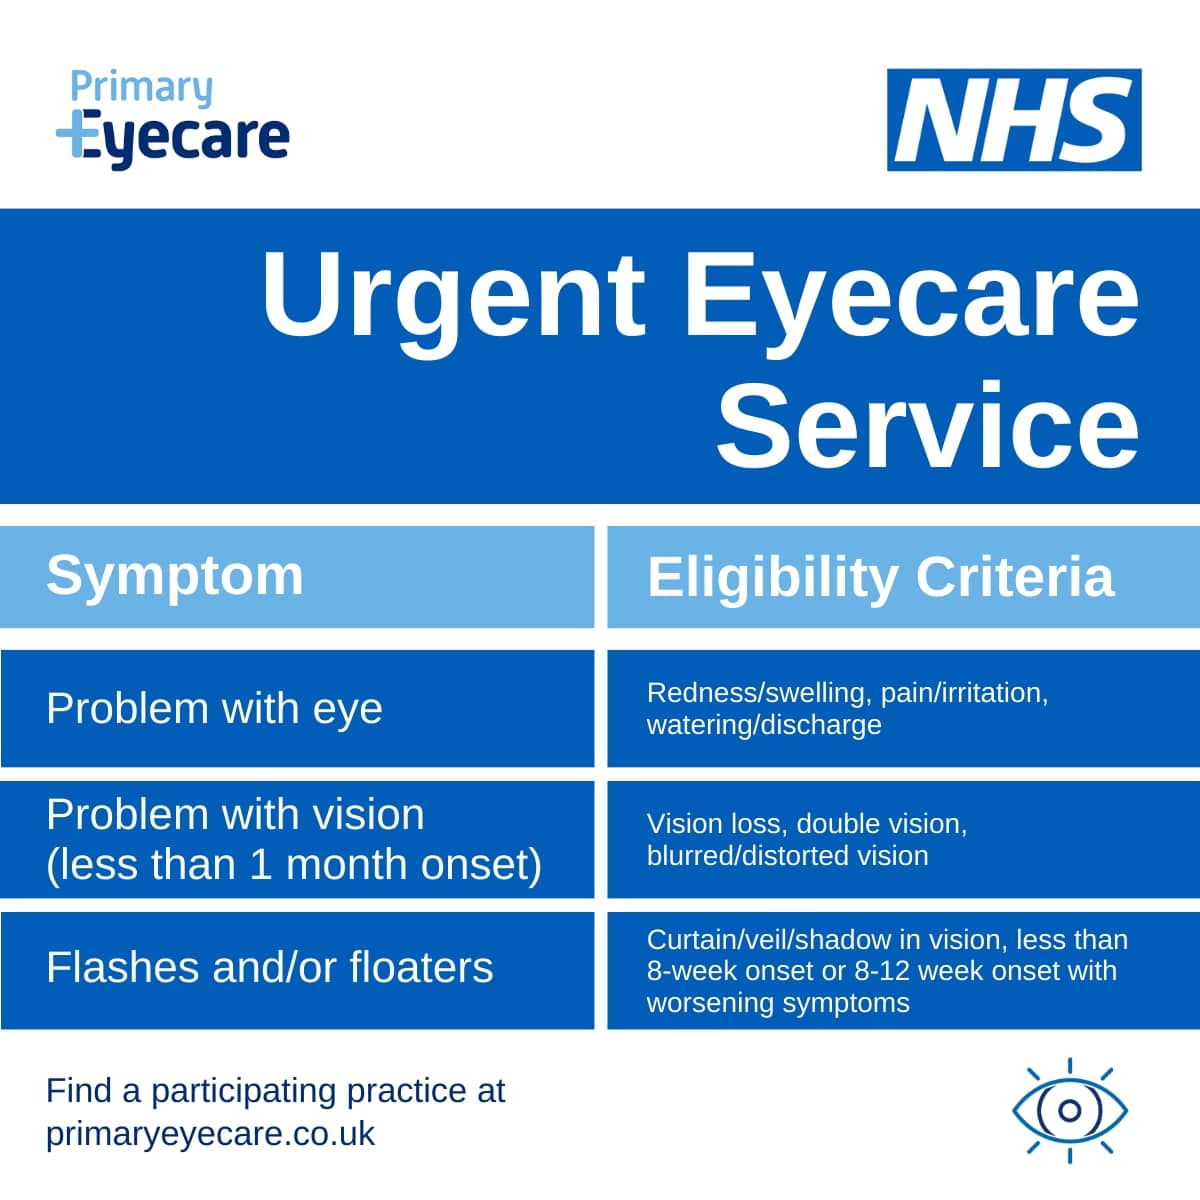 👁️ Experiencing sudden eye issues? Contact our Community Urgent Eyecare Service (CUES) if you have redness, pain, flashes, or floaters for an assessment and treatment. No GP referral needed. Learn more: orlo.uk/EcTAm